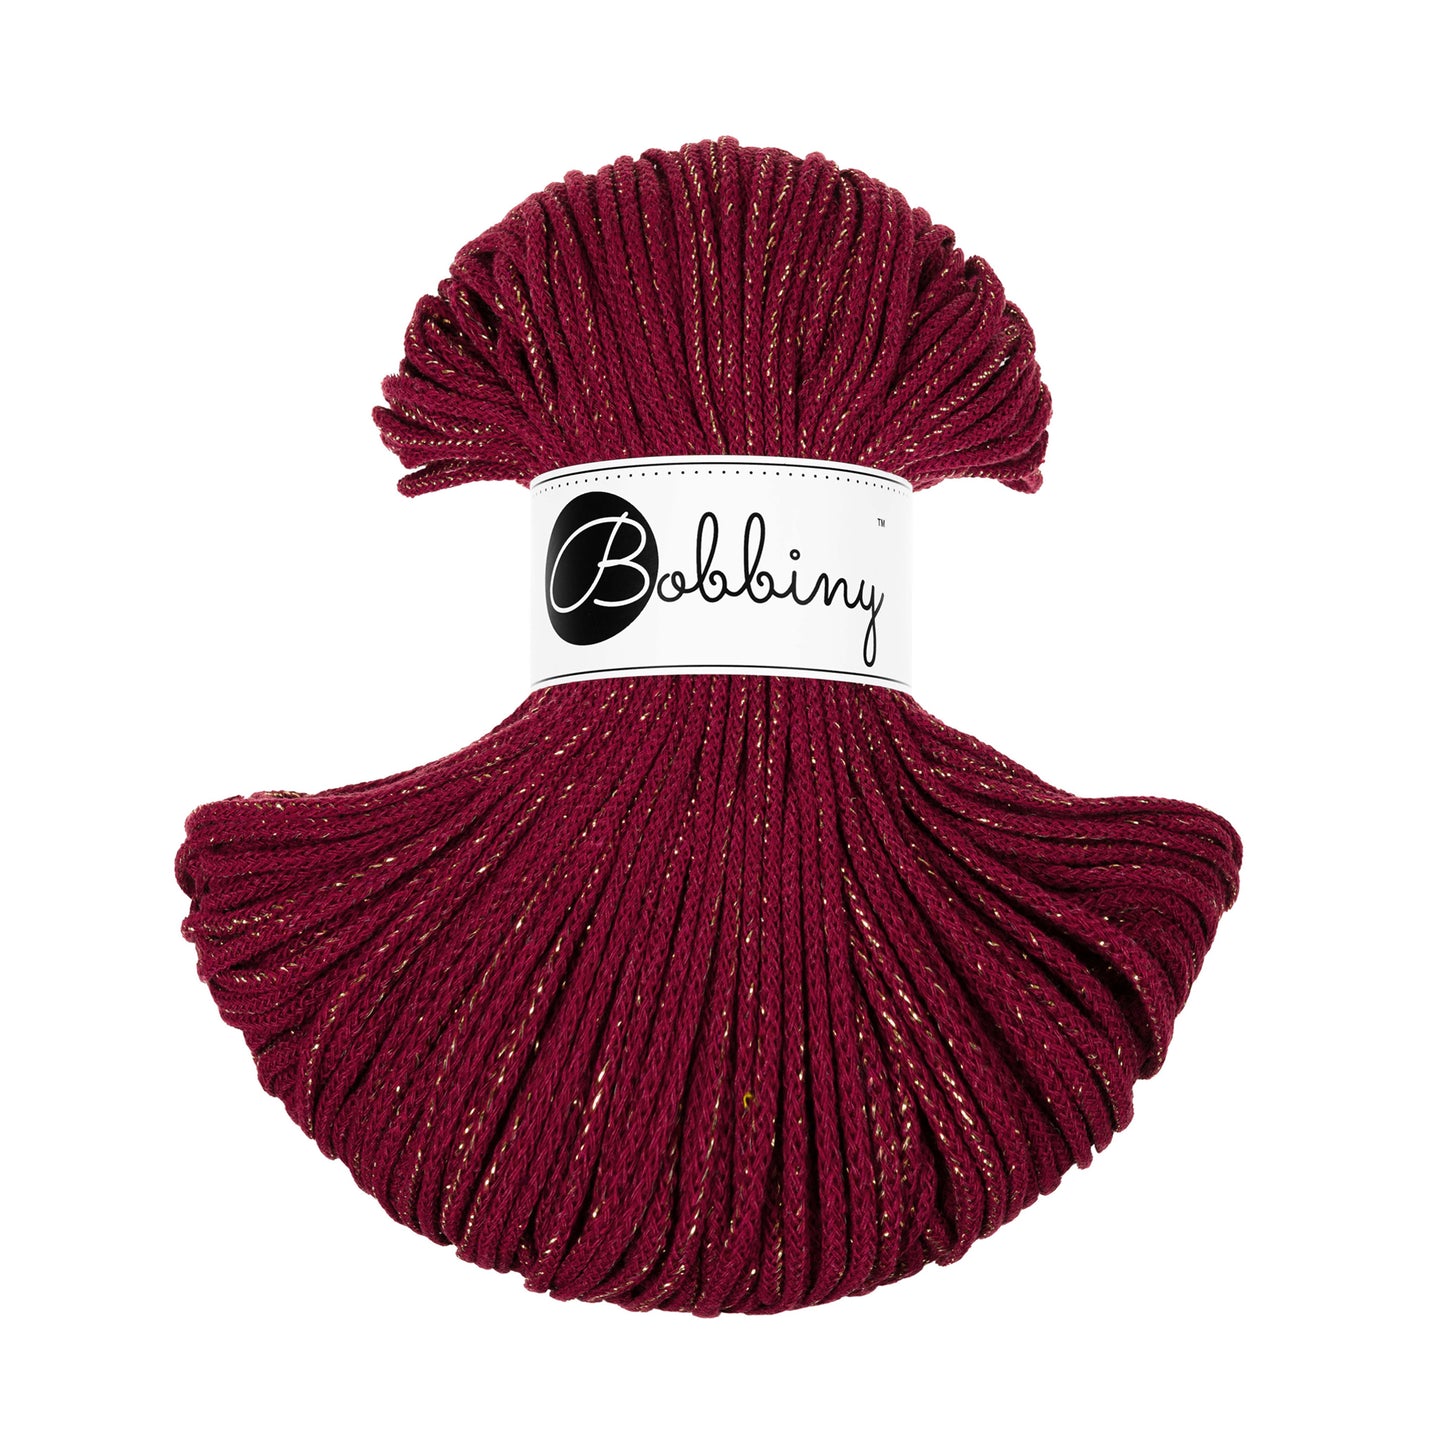 GOLDEN WINE RED cord 3mm